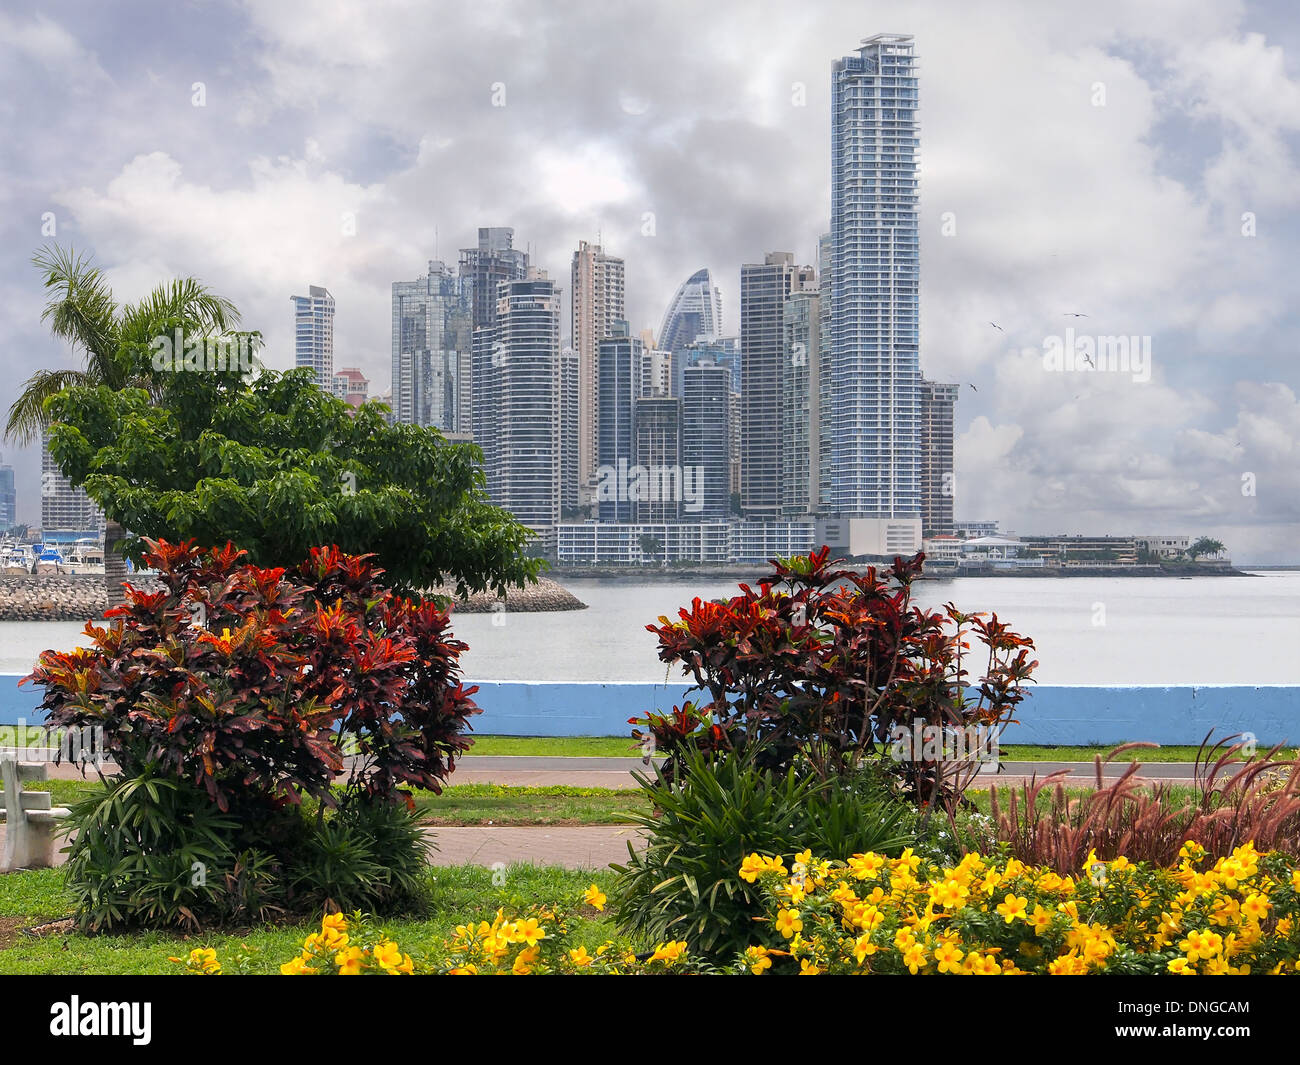 Skyscrapers with colorful tropical plants and a stormy sky, Panama City, Panama, Central America Stock Photo